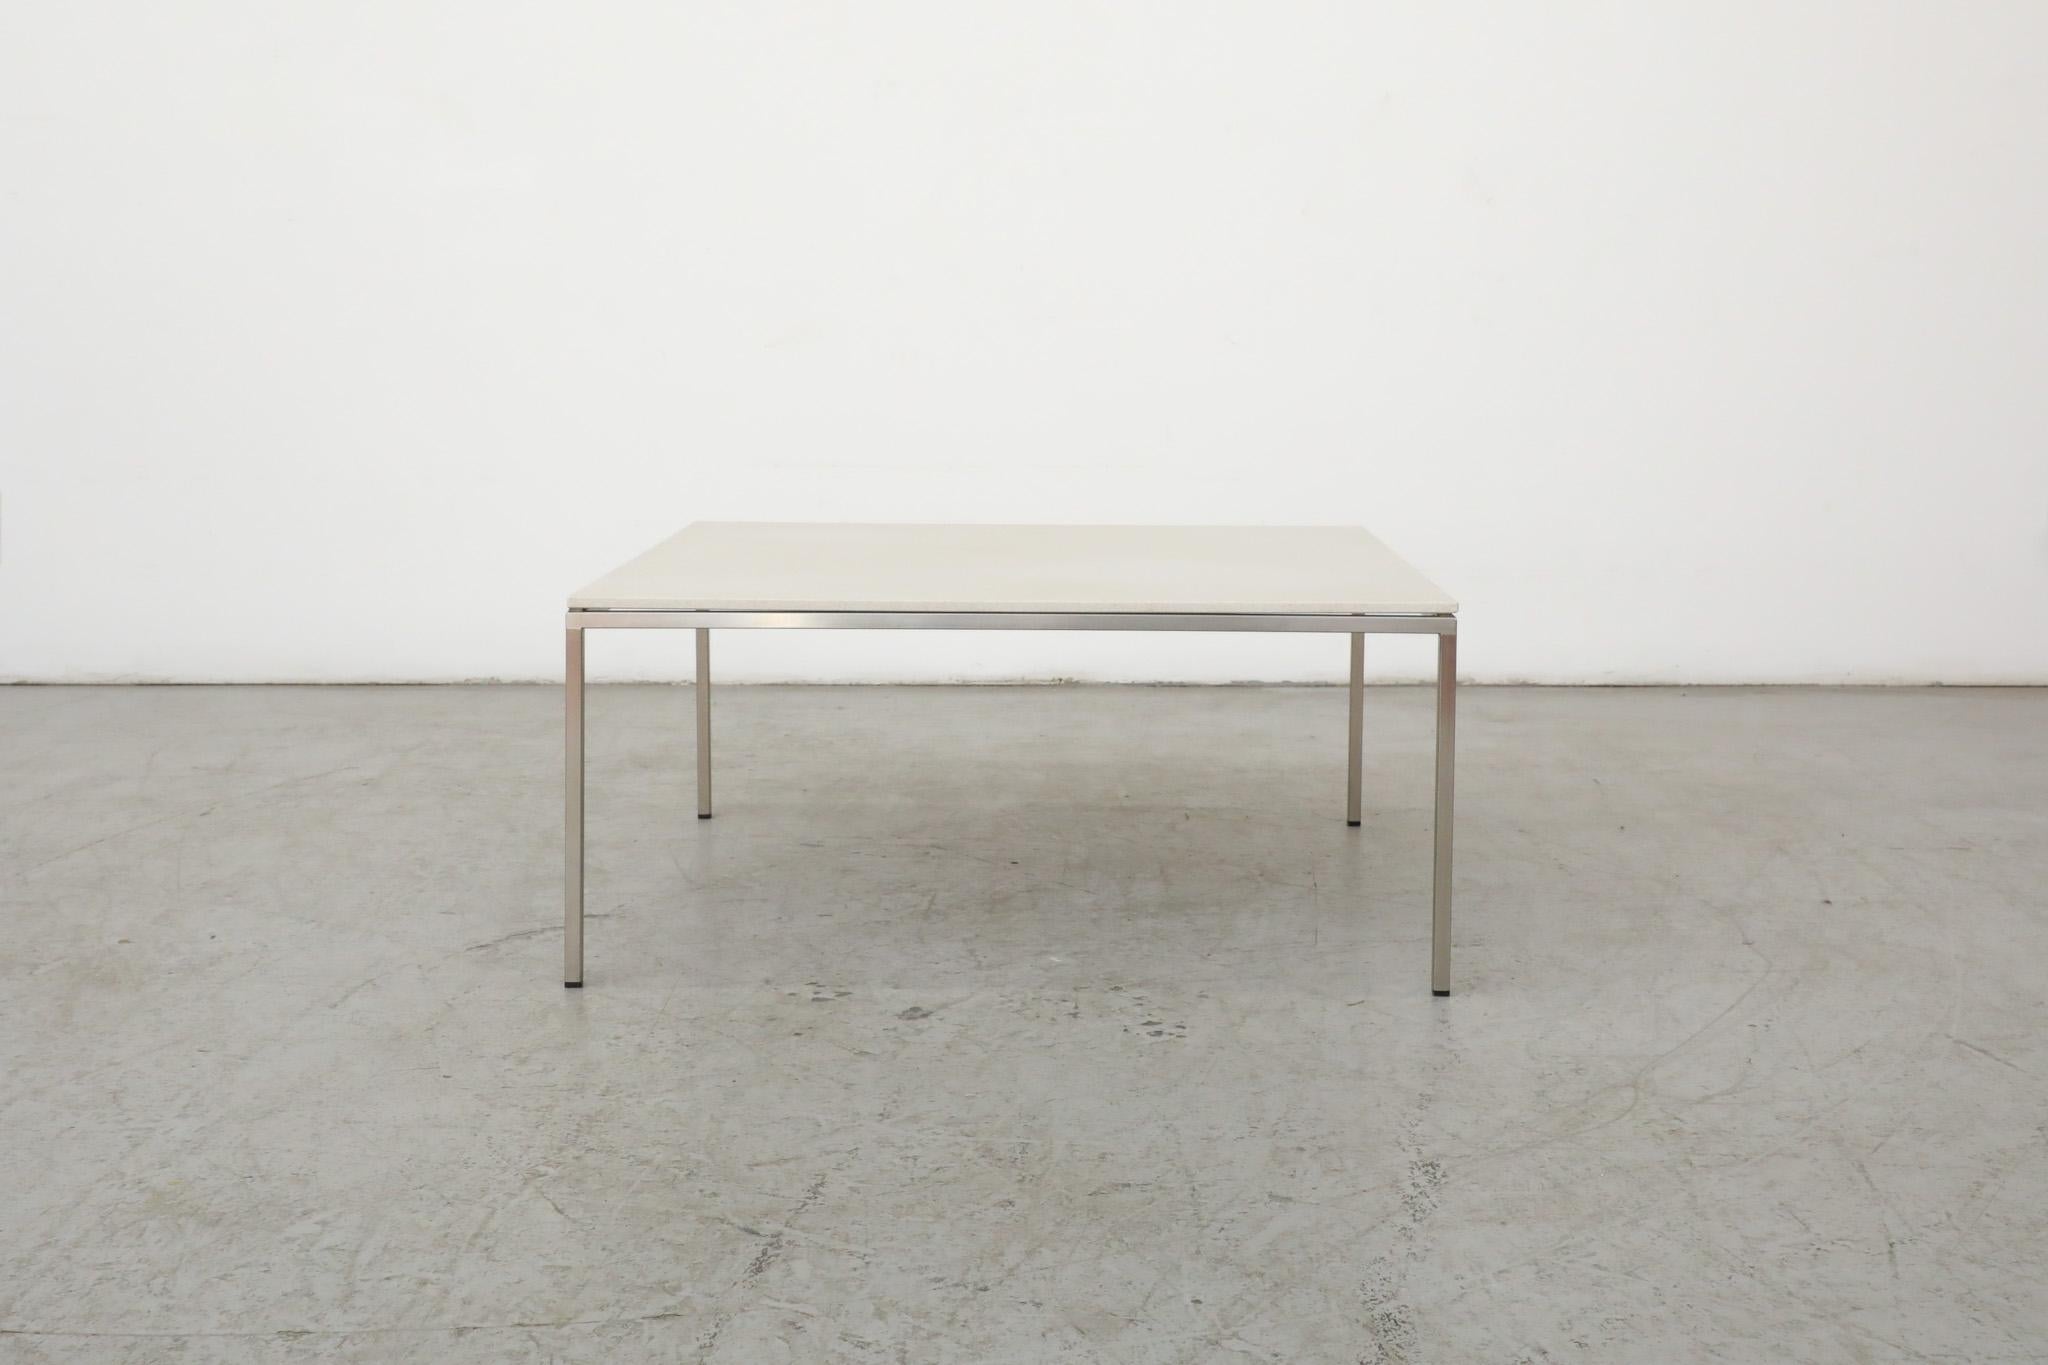 Square, Mid-Century coffee table attributed to Dutch furniture maker Metaform with a white stone top and minimalist chrome frame. A beautiful and clean design that would make a perfect addition to any living space. It is in original condition with